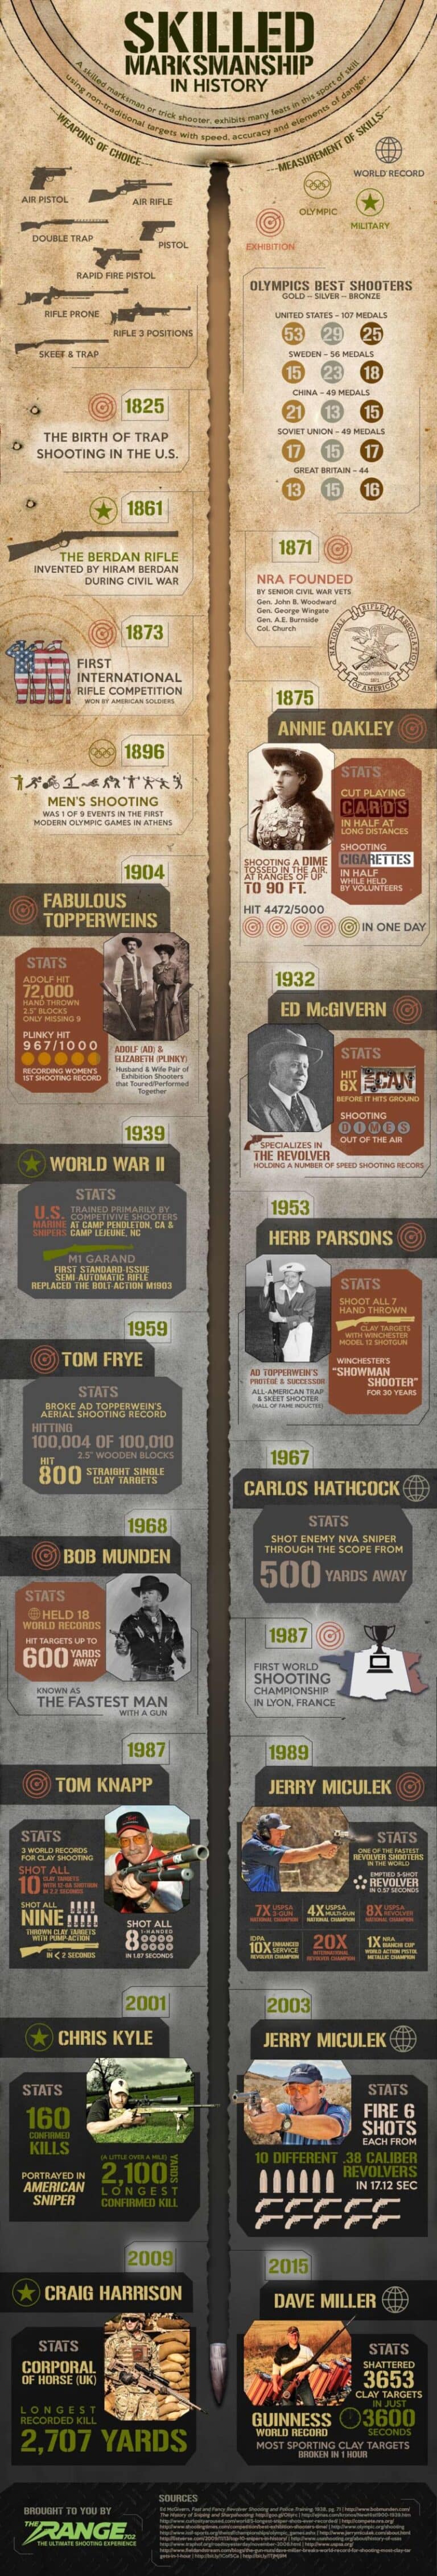 Skilled Marksmanship in History [Infographic]